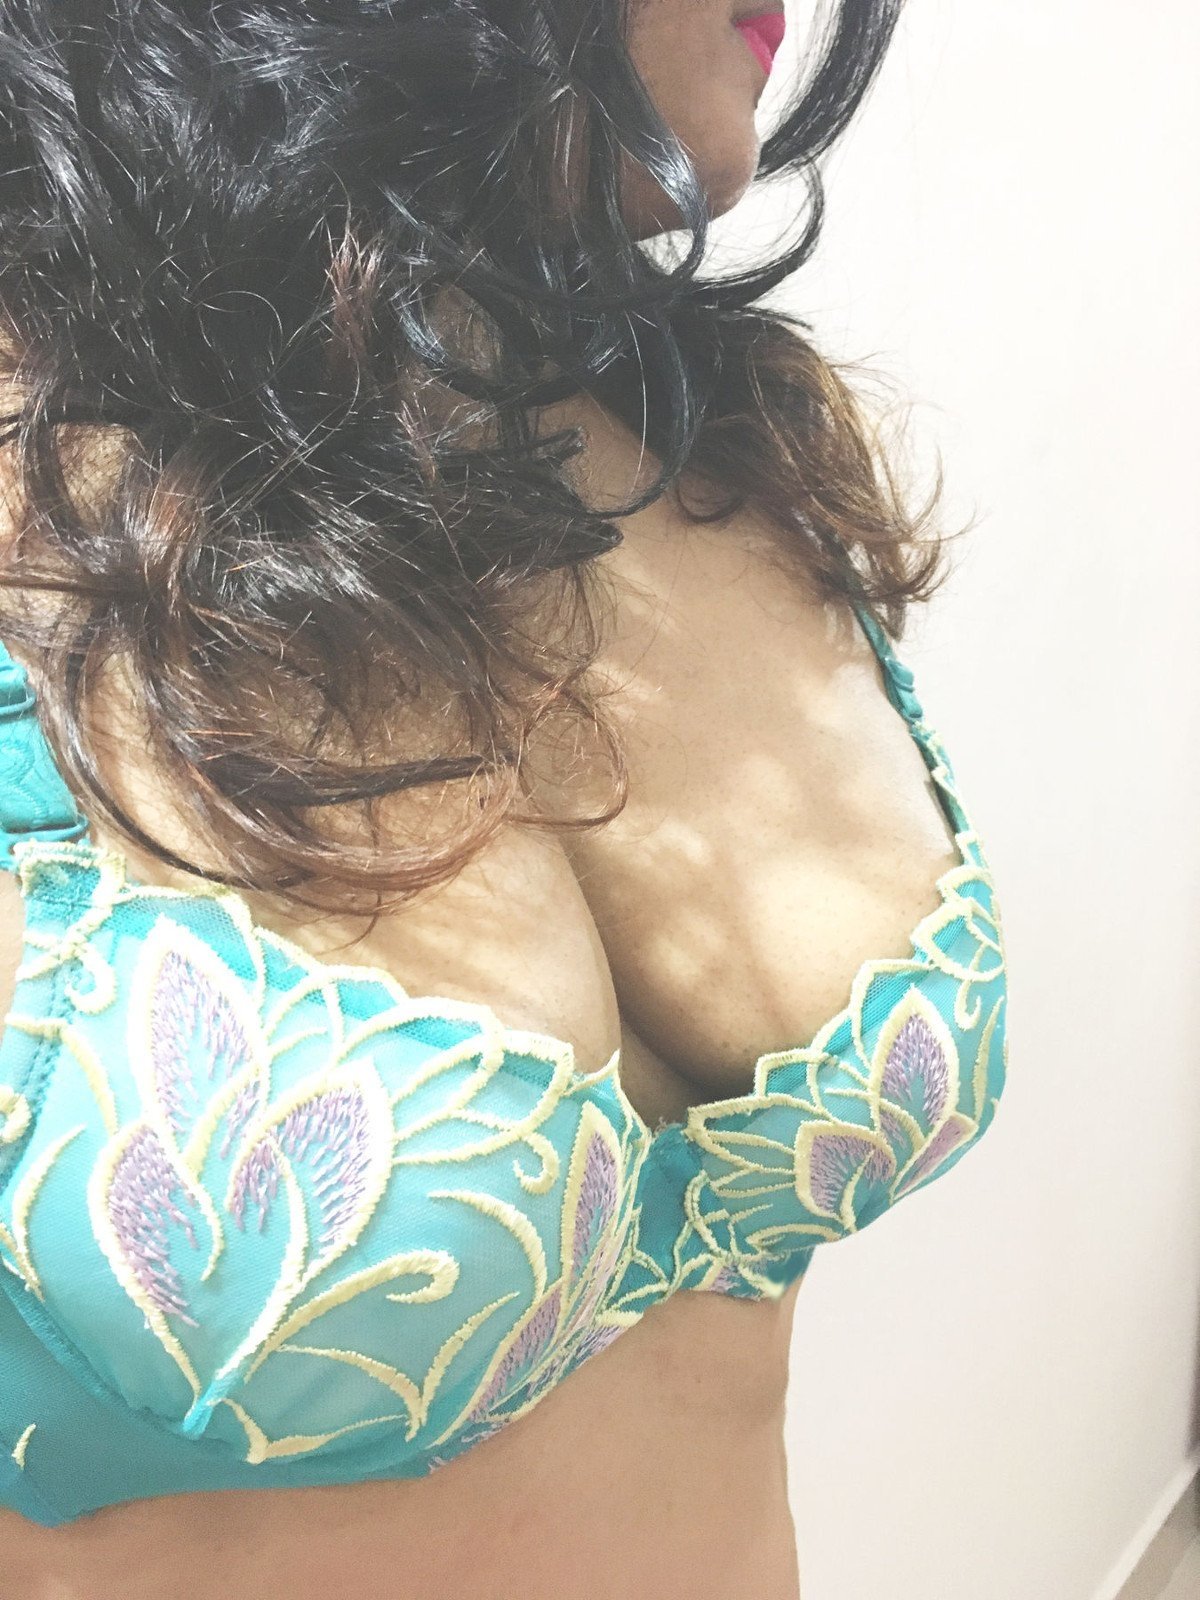 Veena love for your cam and meetup, Sri Lankan escort in Colombo